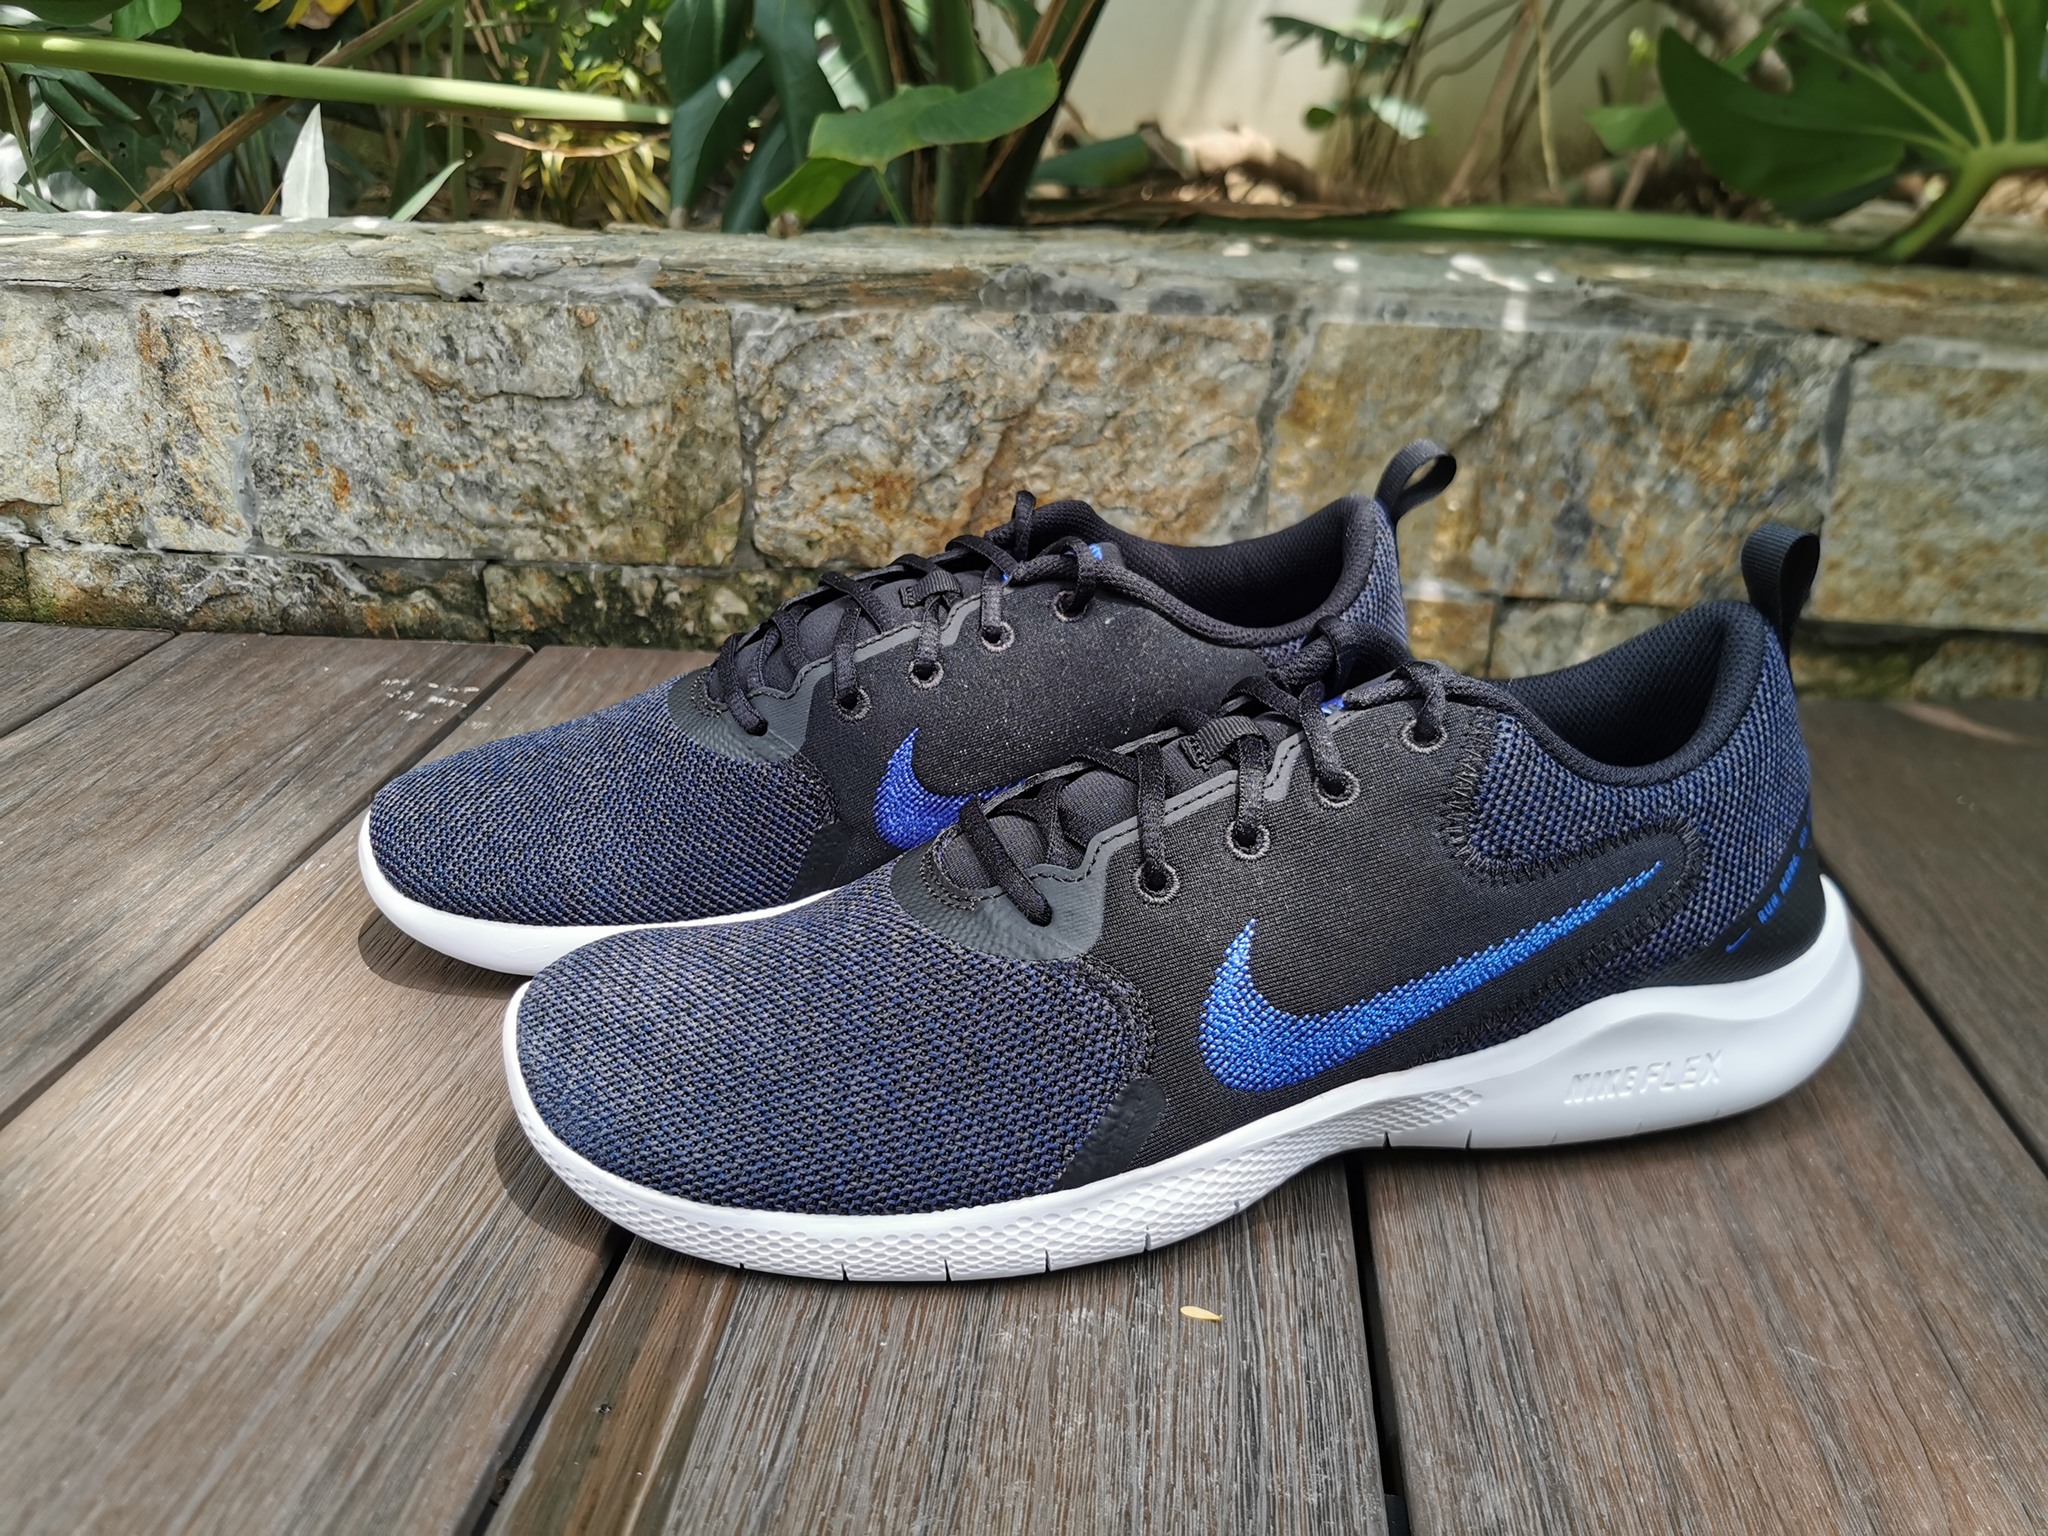 Nike Flex 10: The inexpensive all-around running for men - Pinoy Guy Guide